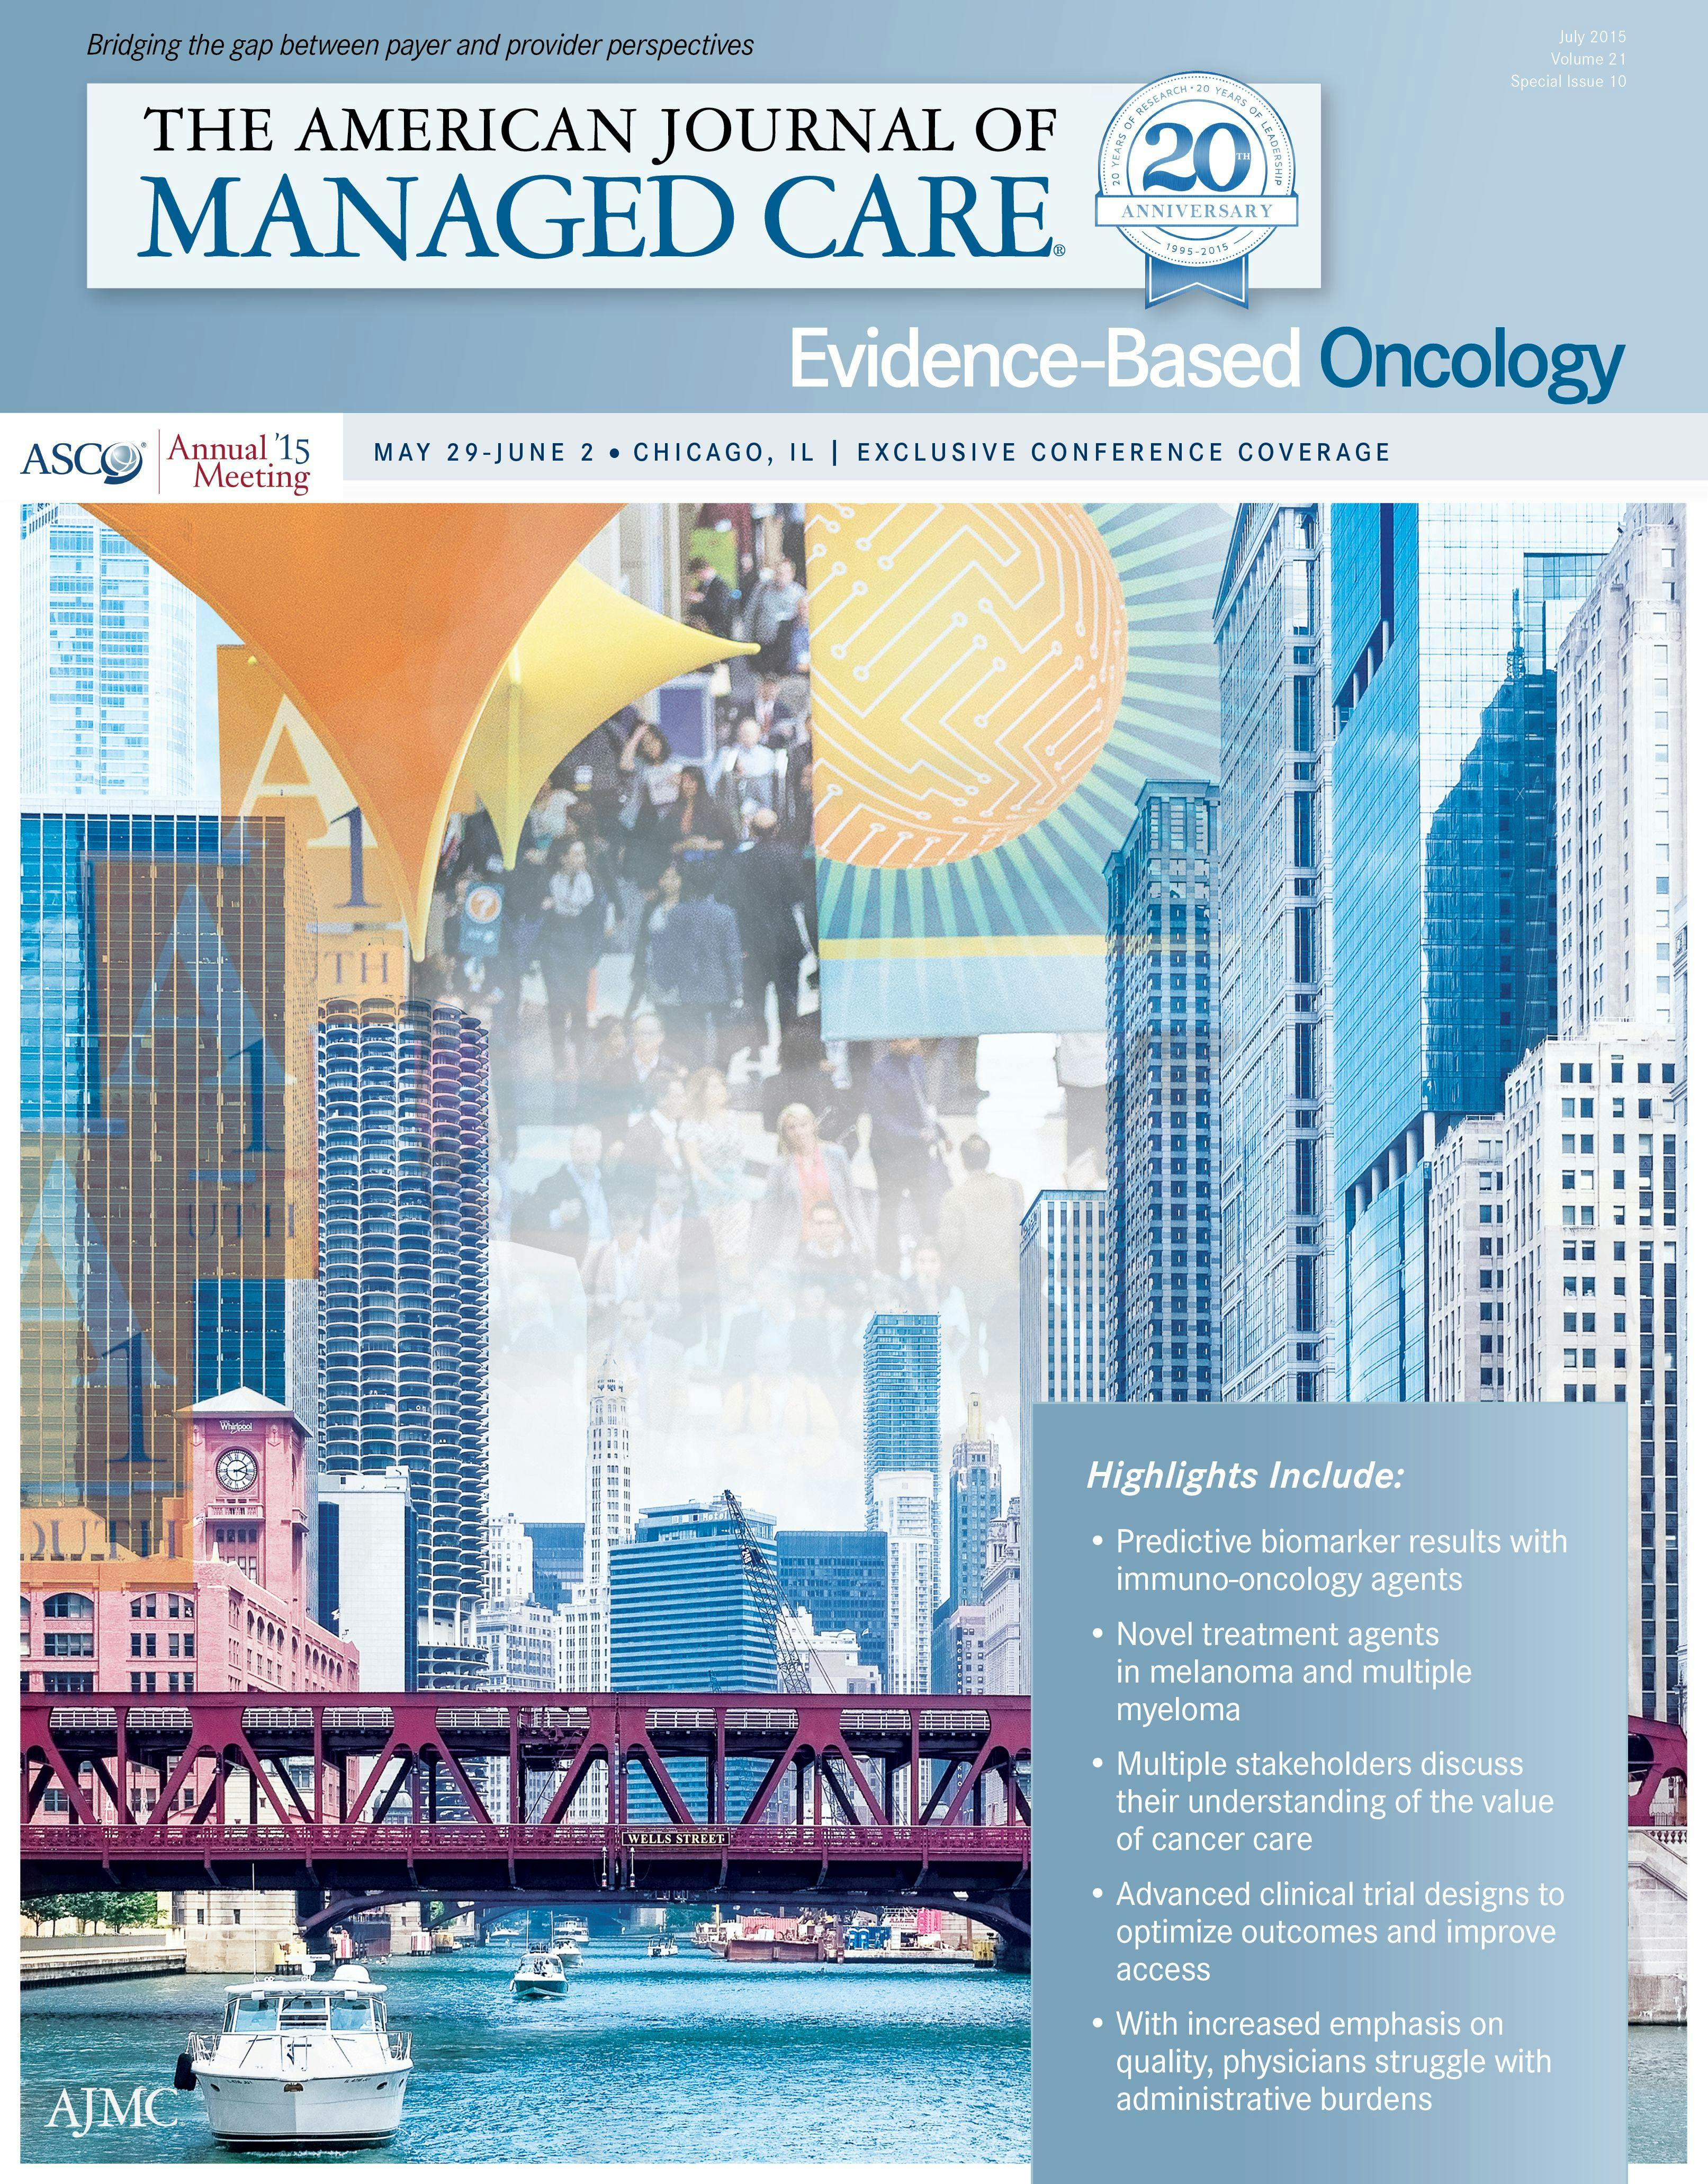 The American Society of Clinical Oncology Annual Meeting, 2015